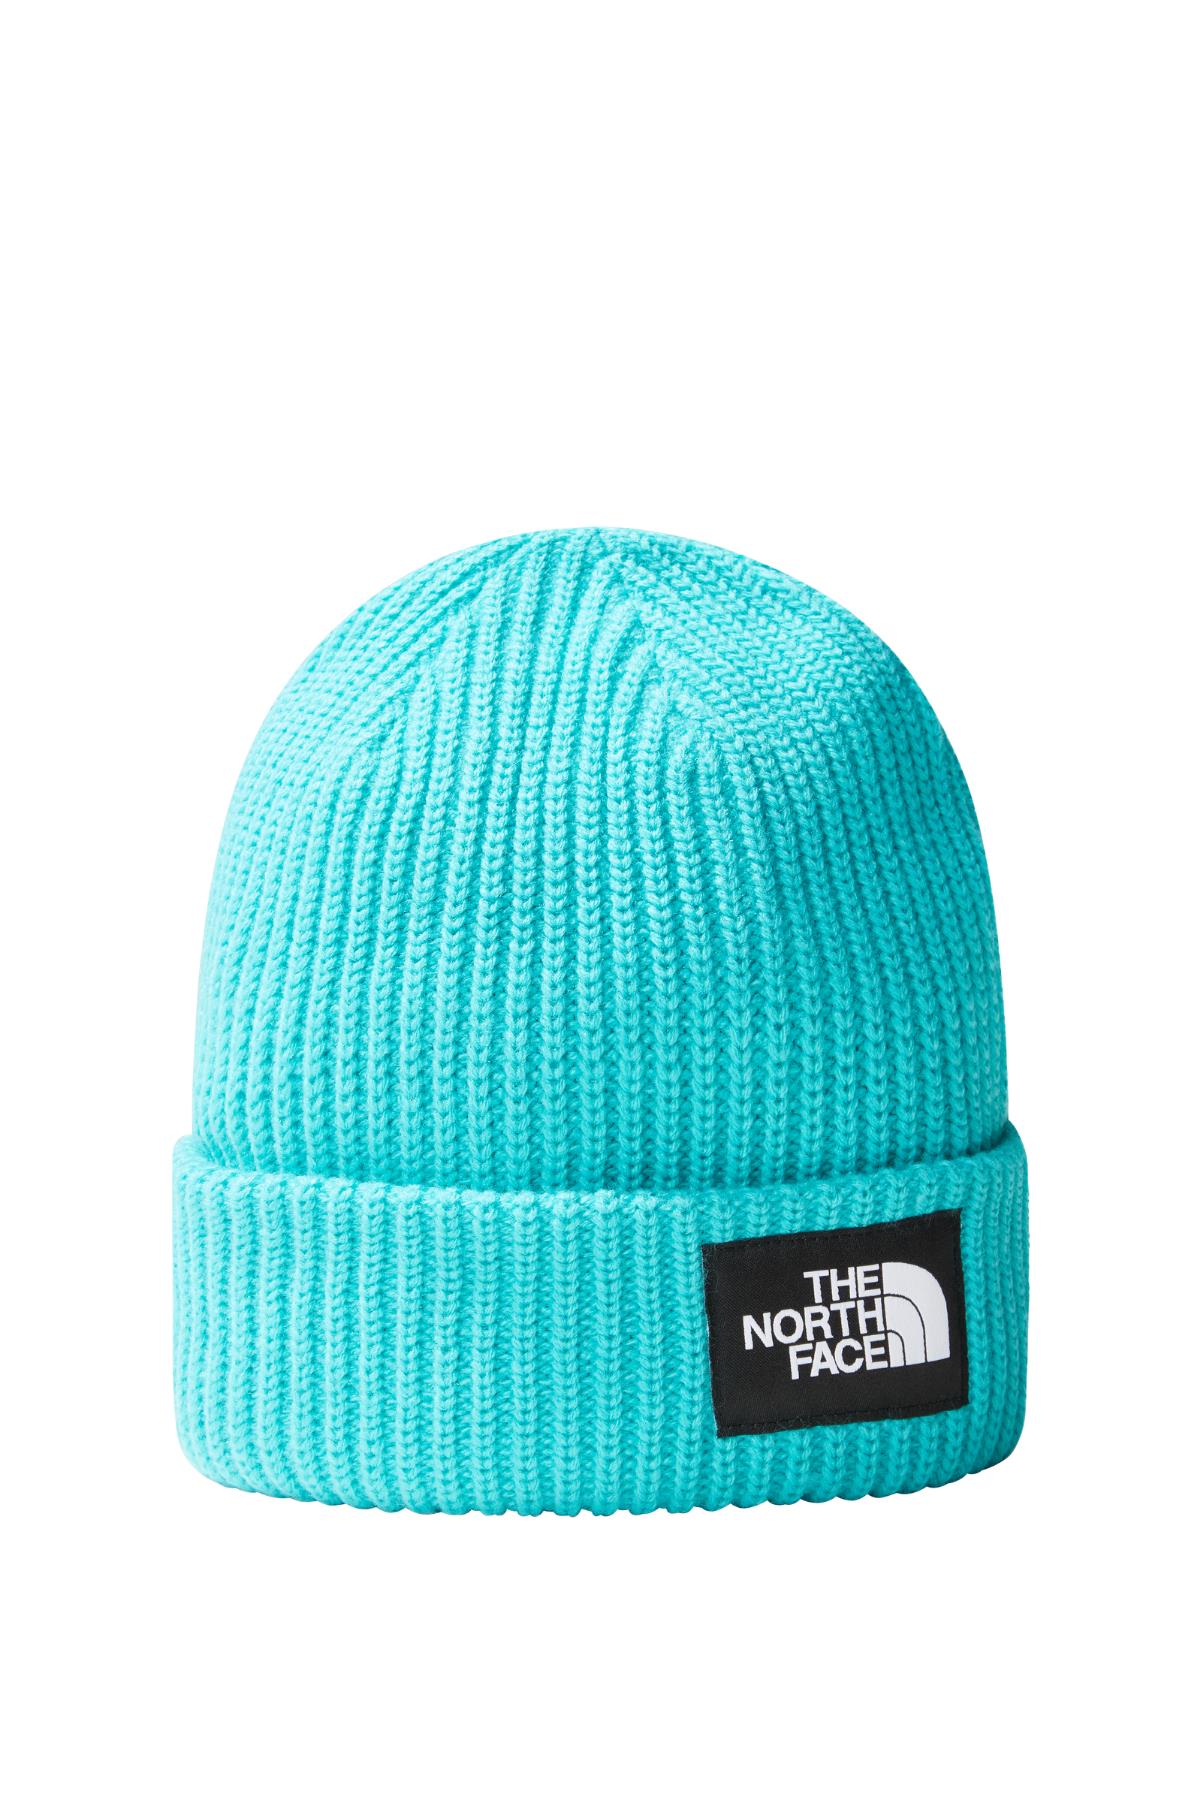 The North Face Salty Lined Beanie Bere Mavi